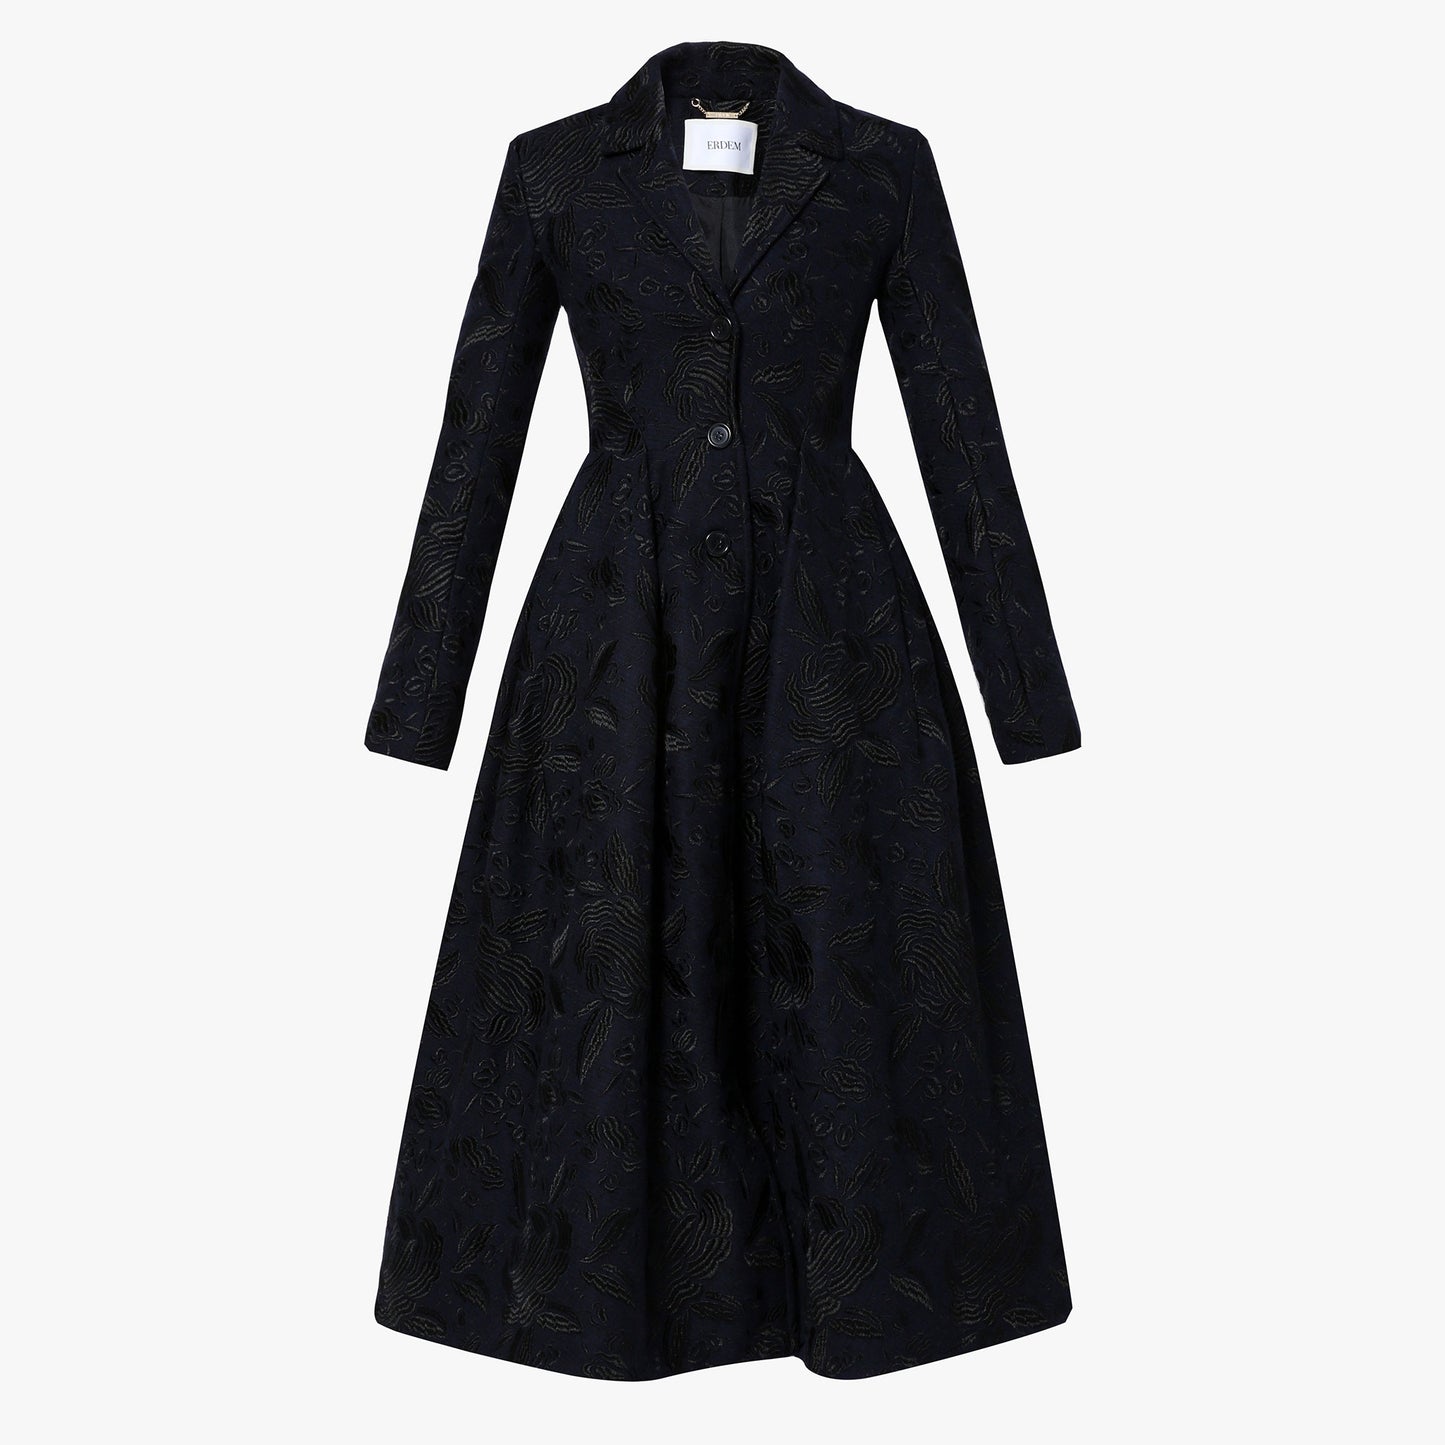 Stephanie Embroidered Coat